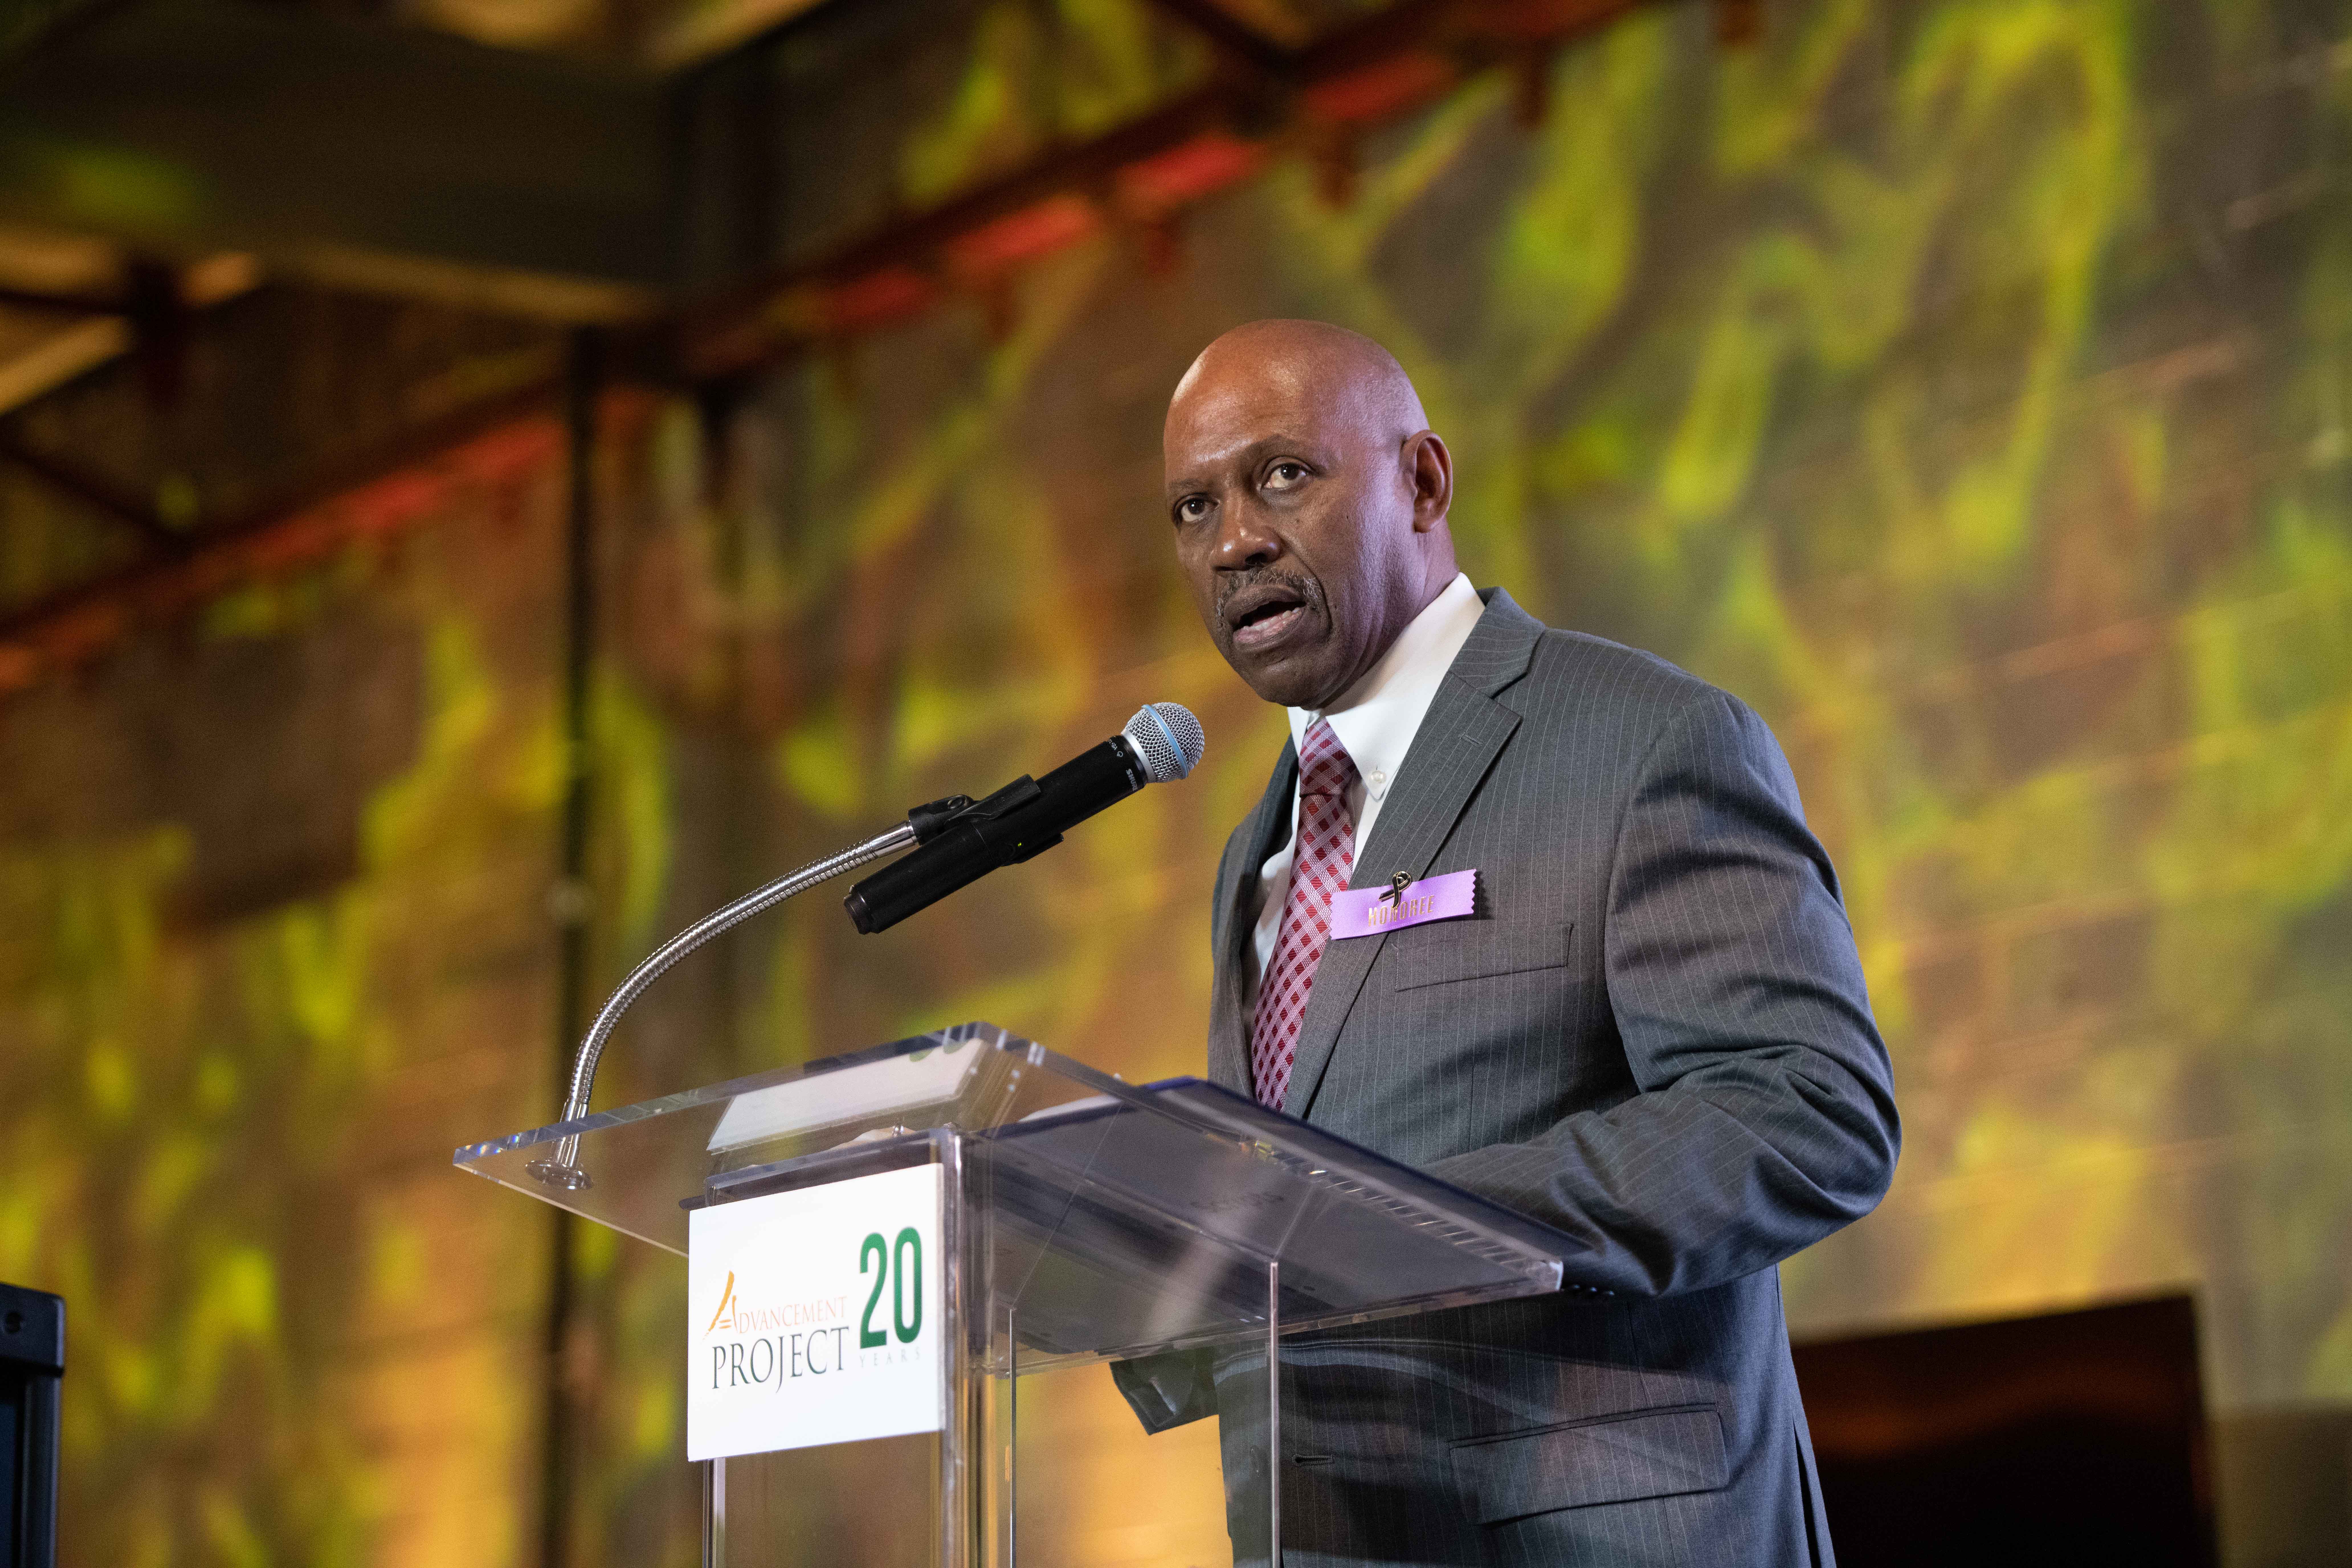 Voice of the Experienced (VOTE) Founder and Executive Director Norris Henderson speaks on his organization's work while accepting the Turn the Tide Award.